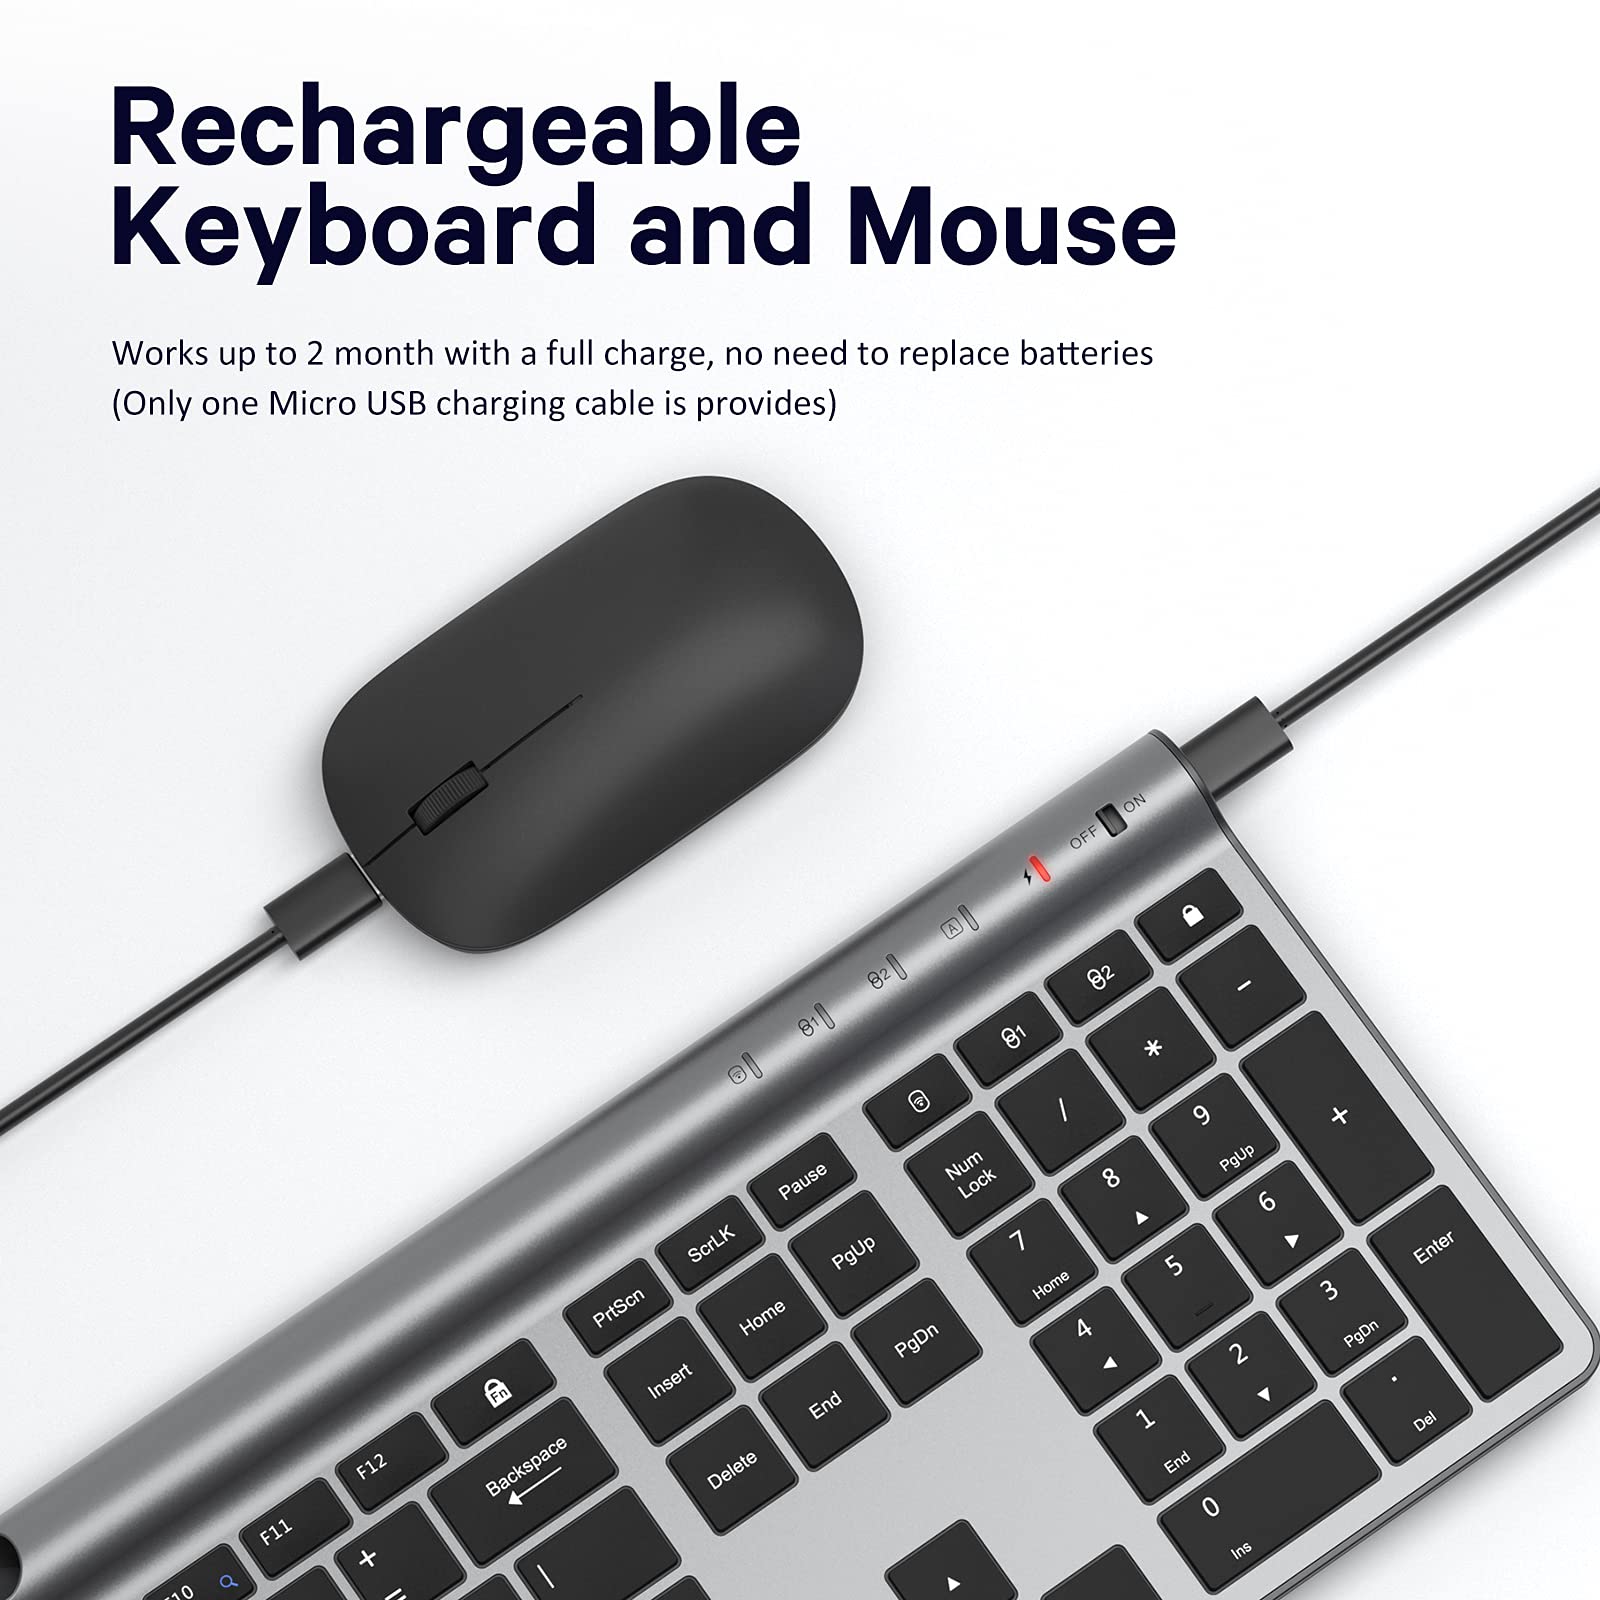 Wireless Keyboard and Mouse Combo, CHESONA Bluetooth Rechargeable Full Size Multi-Device (Bluetooth 5.0+3.0+2.4G) Wireless Keyboard Mouse Combo for Mac OS/iOS/Windows/Android (Silver Black)